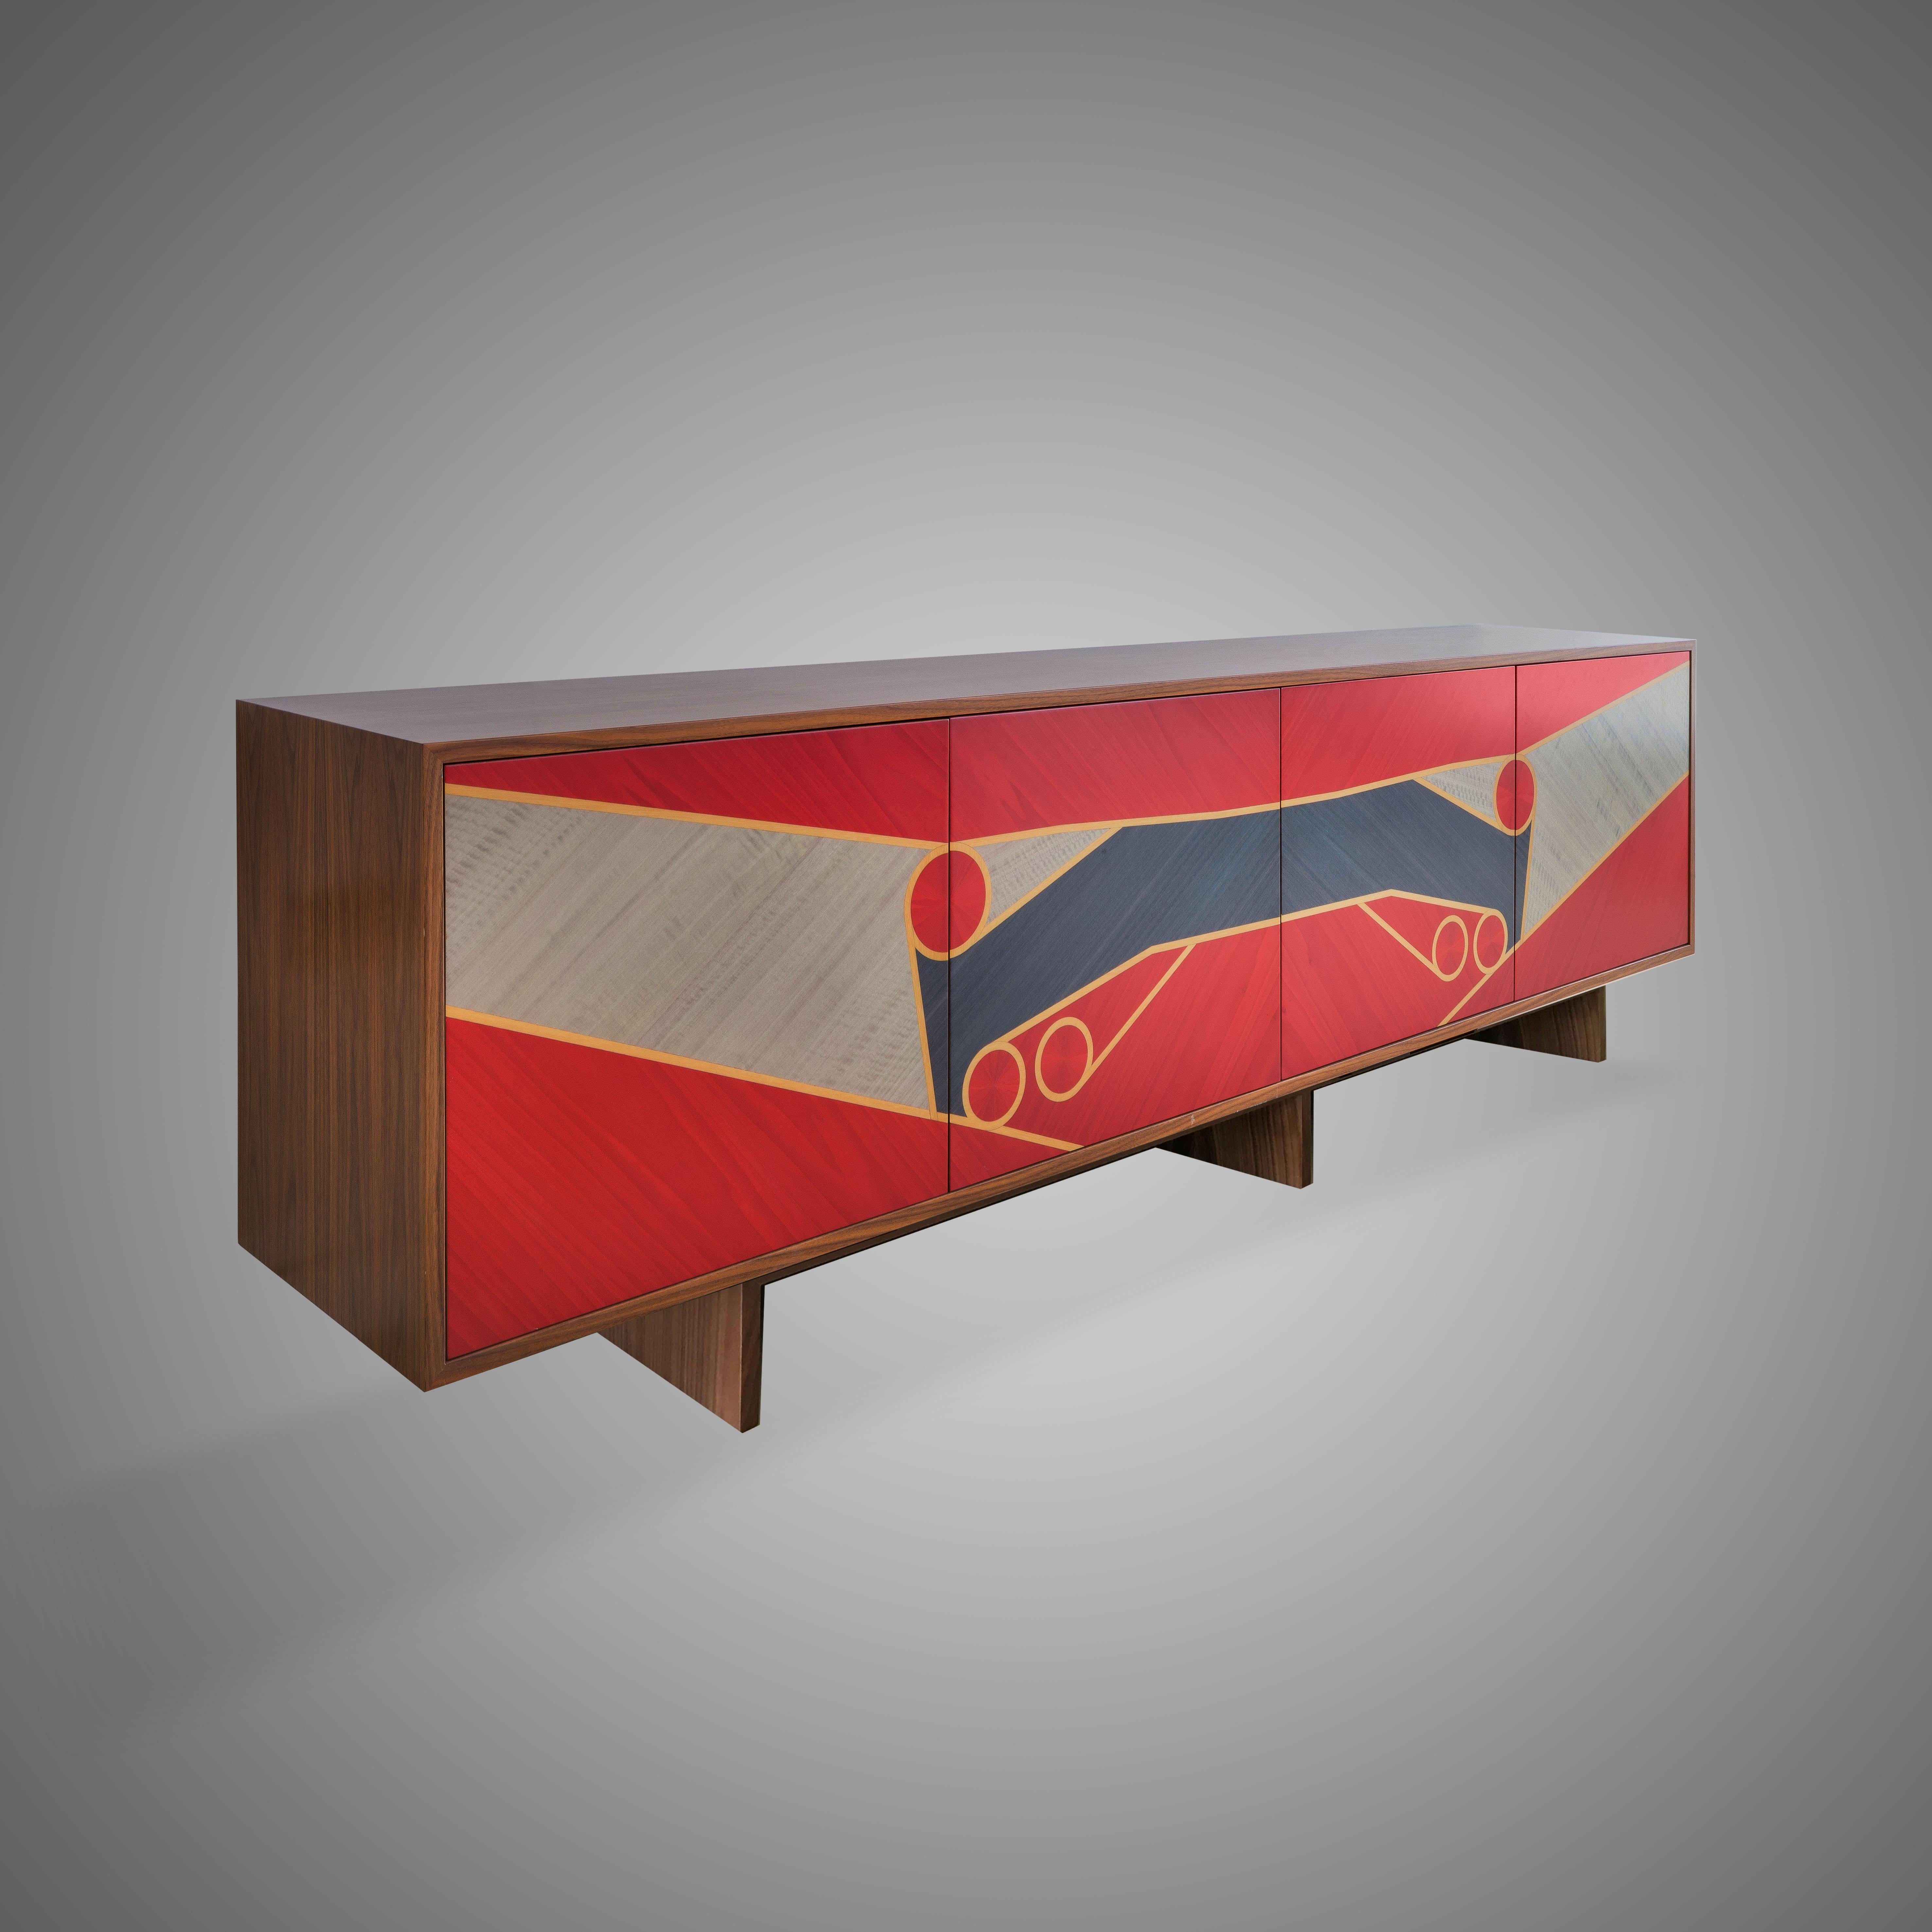 This cabinet is made in walnut wood veneer carcass and legs, oak wood veneer internal shelves, colourful veneer doors

As with all our furniture, this sideboard is made to order and is therefore highly customisable, including in size and finish. The